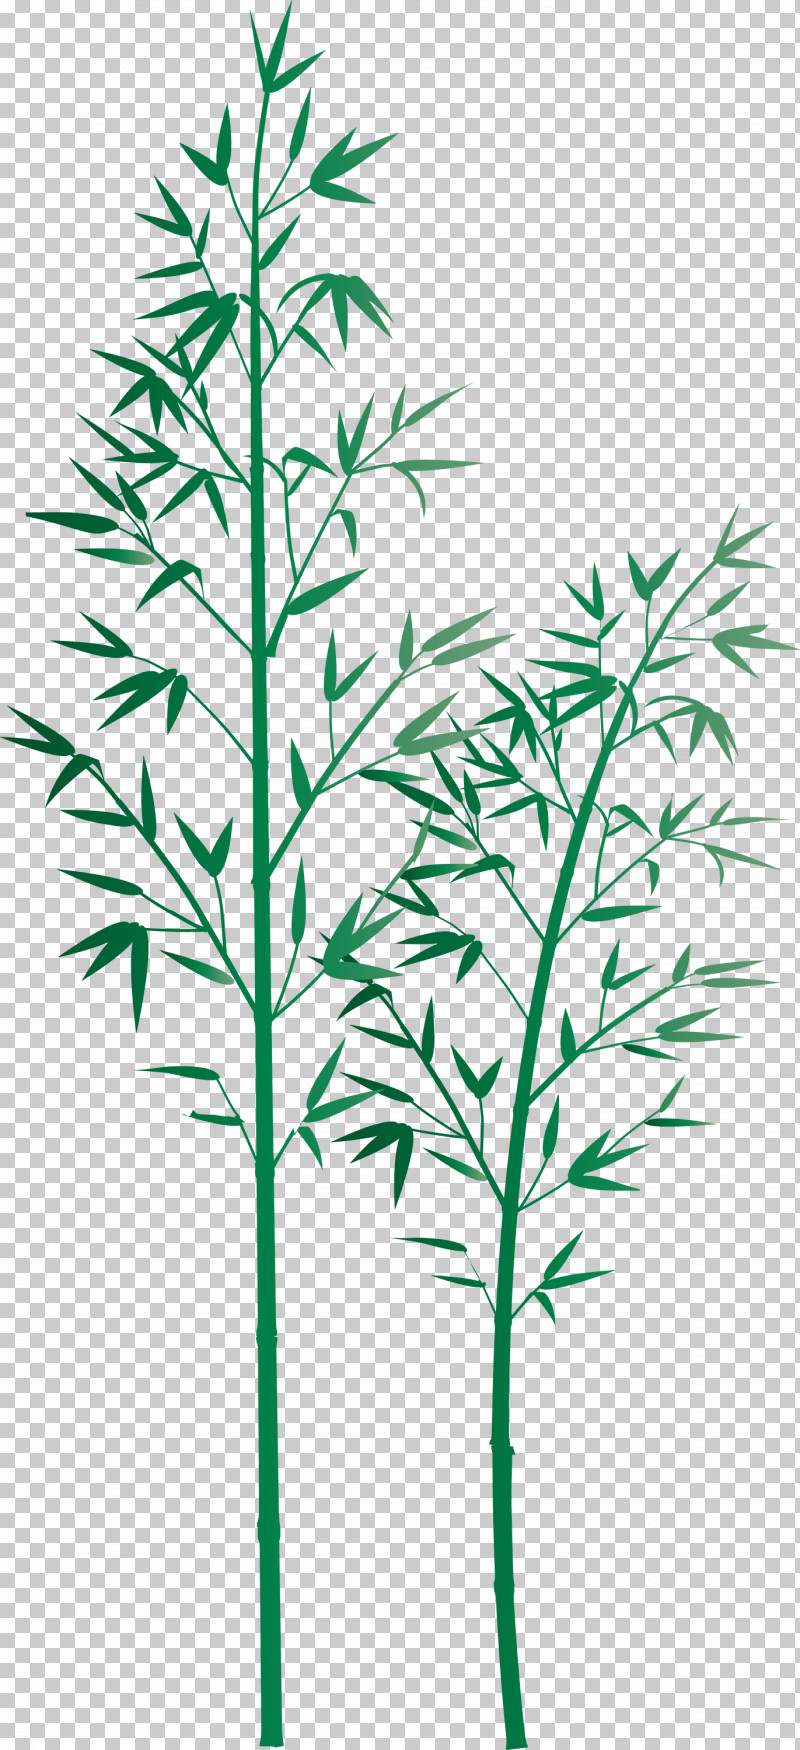 Bamboo Leaf PNG, Clipart, Bamboo, Flower, Grass, Grass Family, Heracleum Plant Free PNG Download